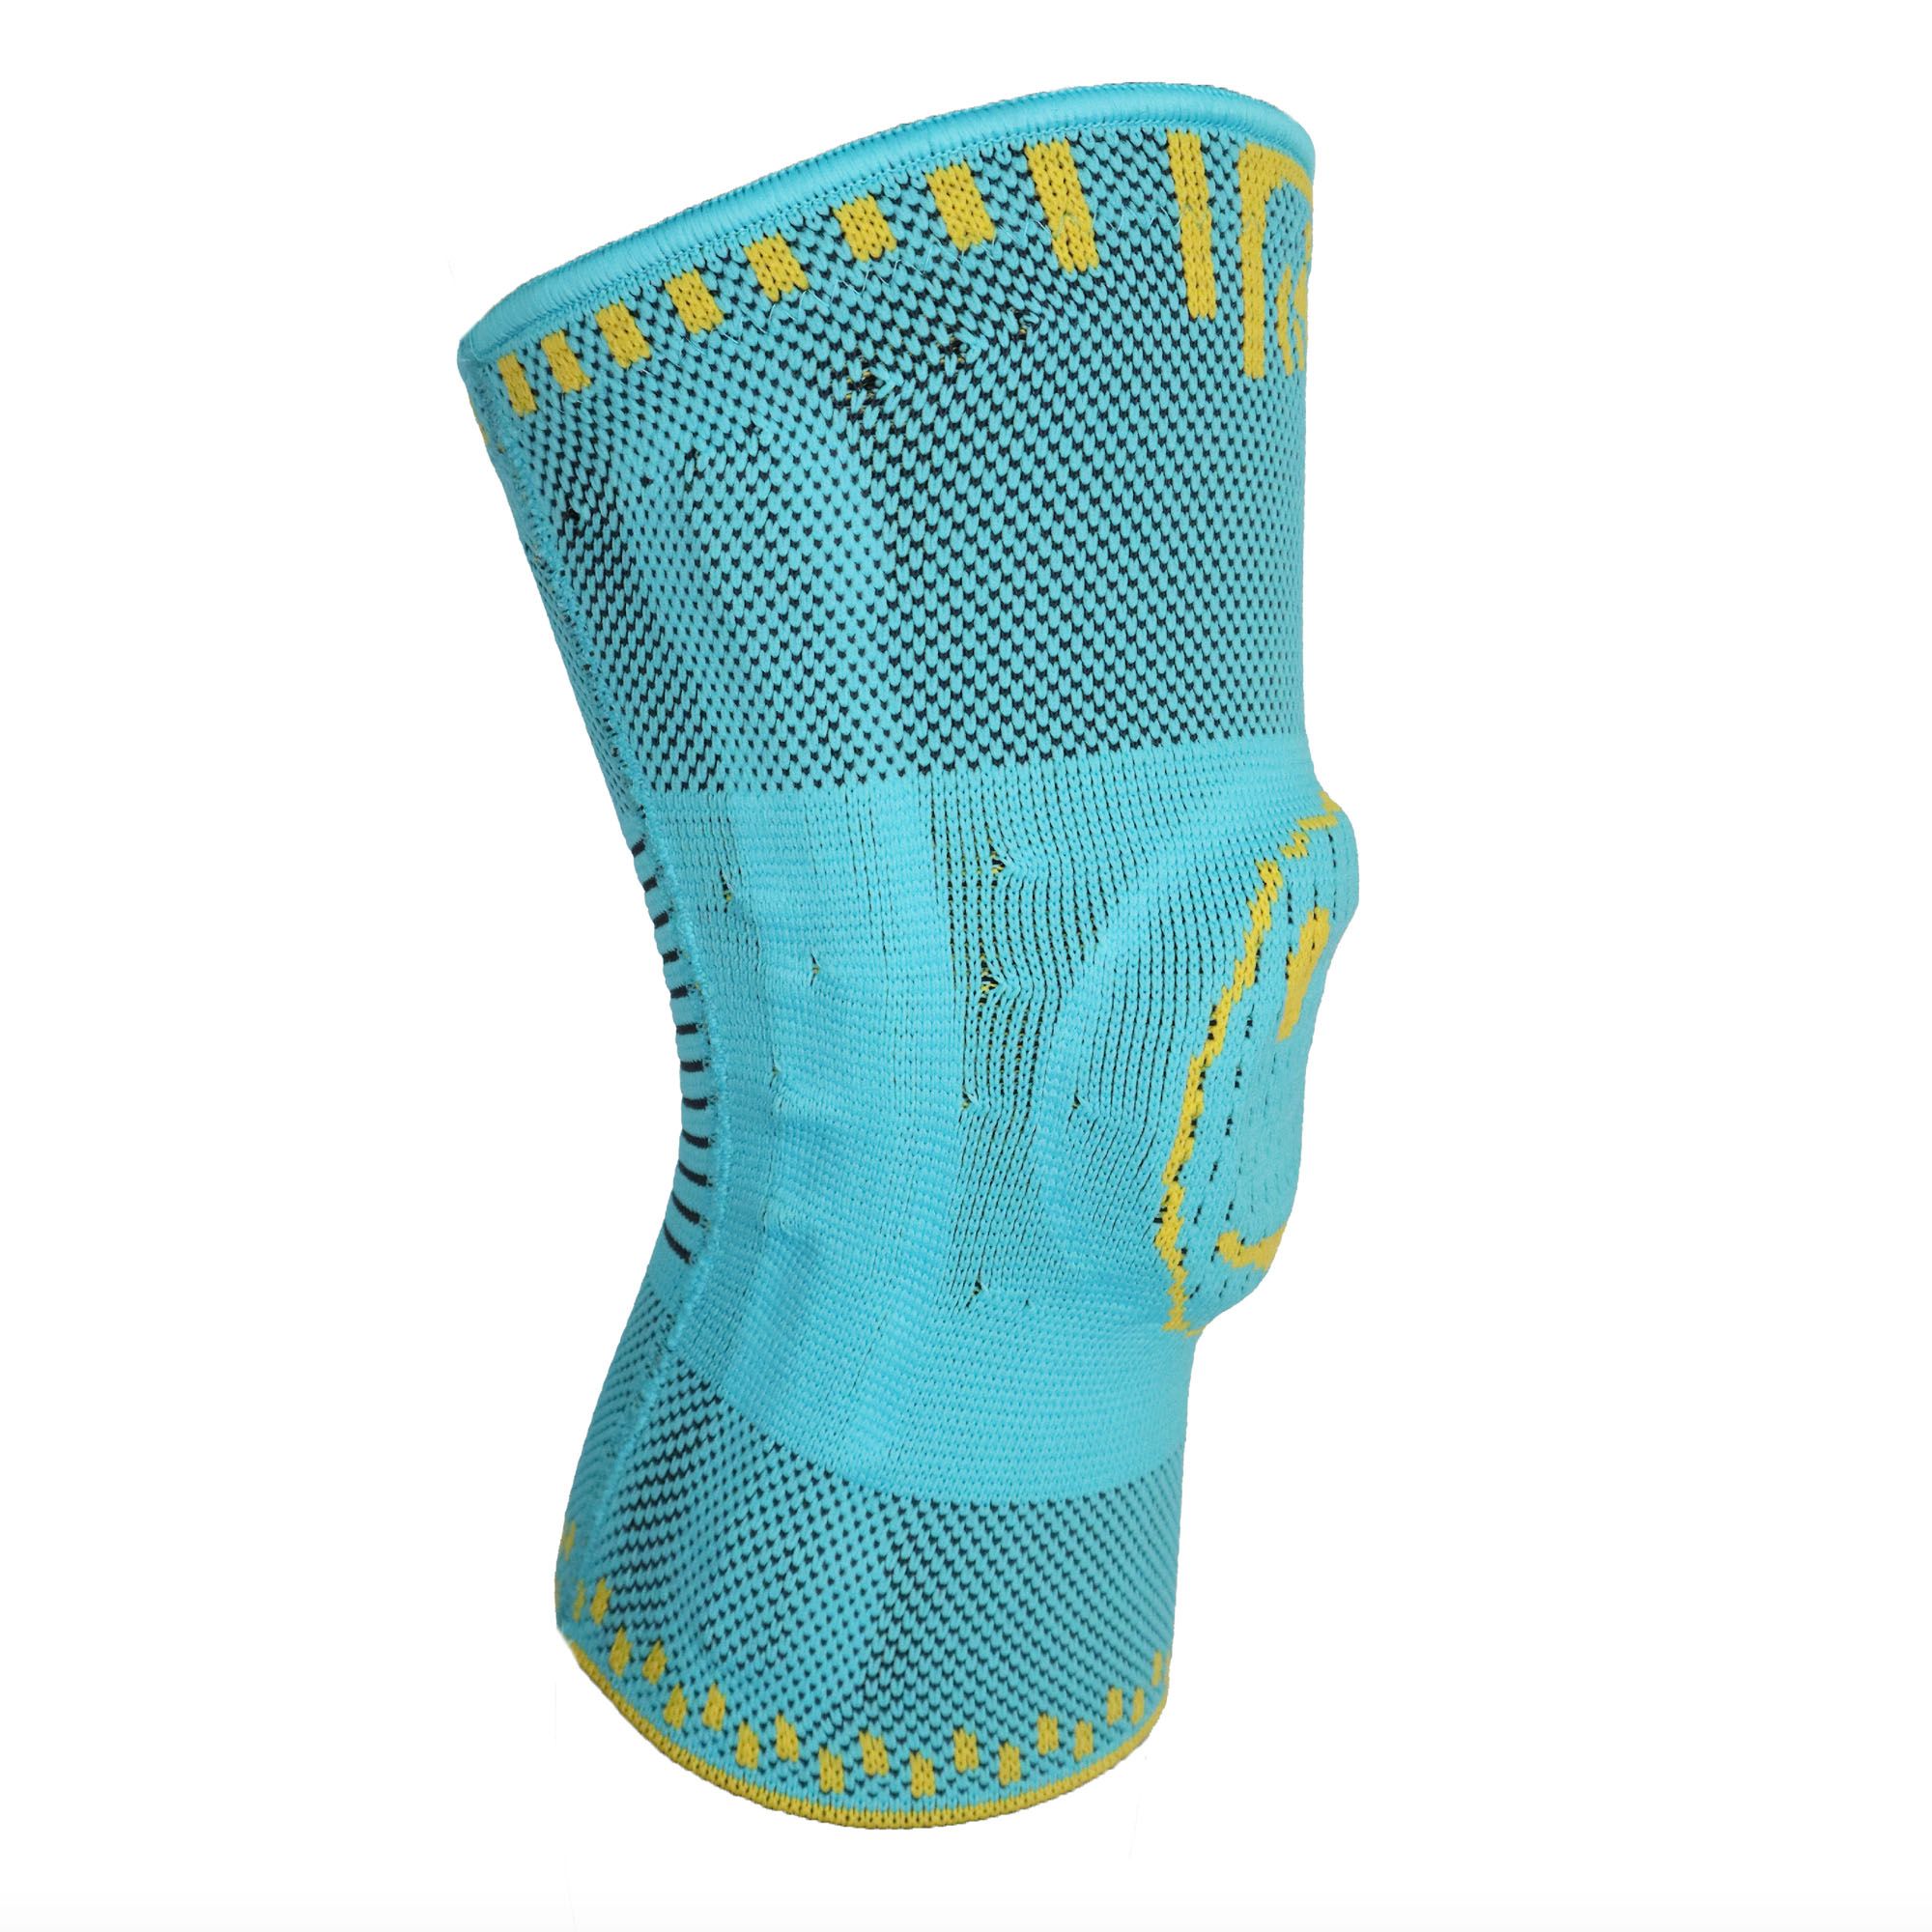 morsa kids knee support zoomed out